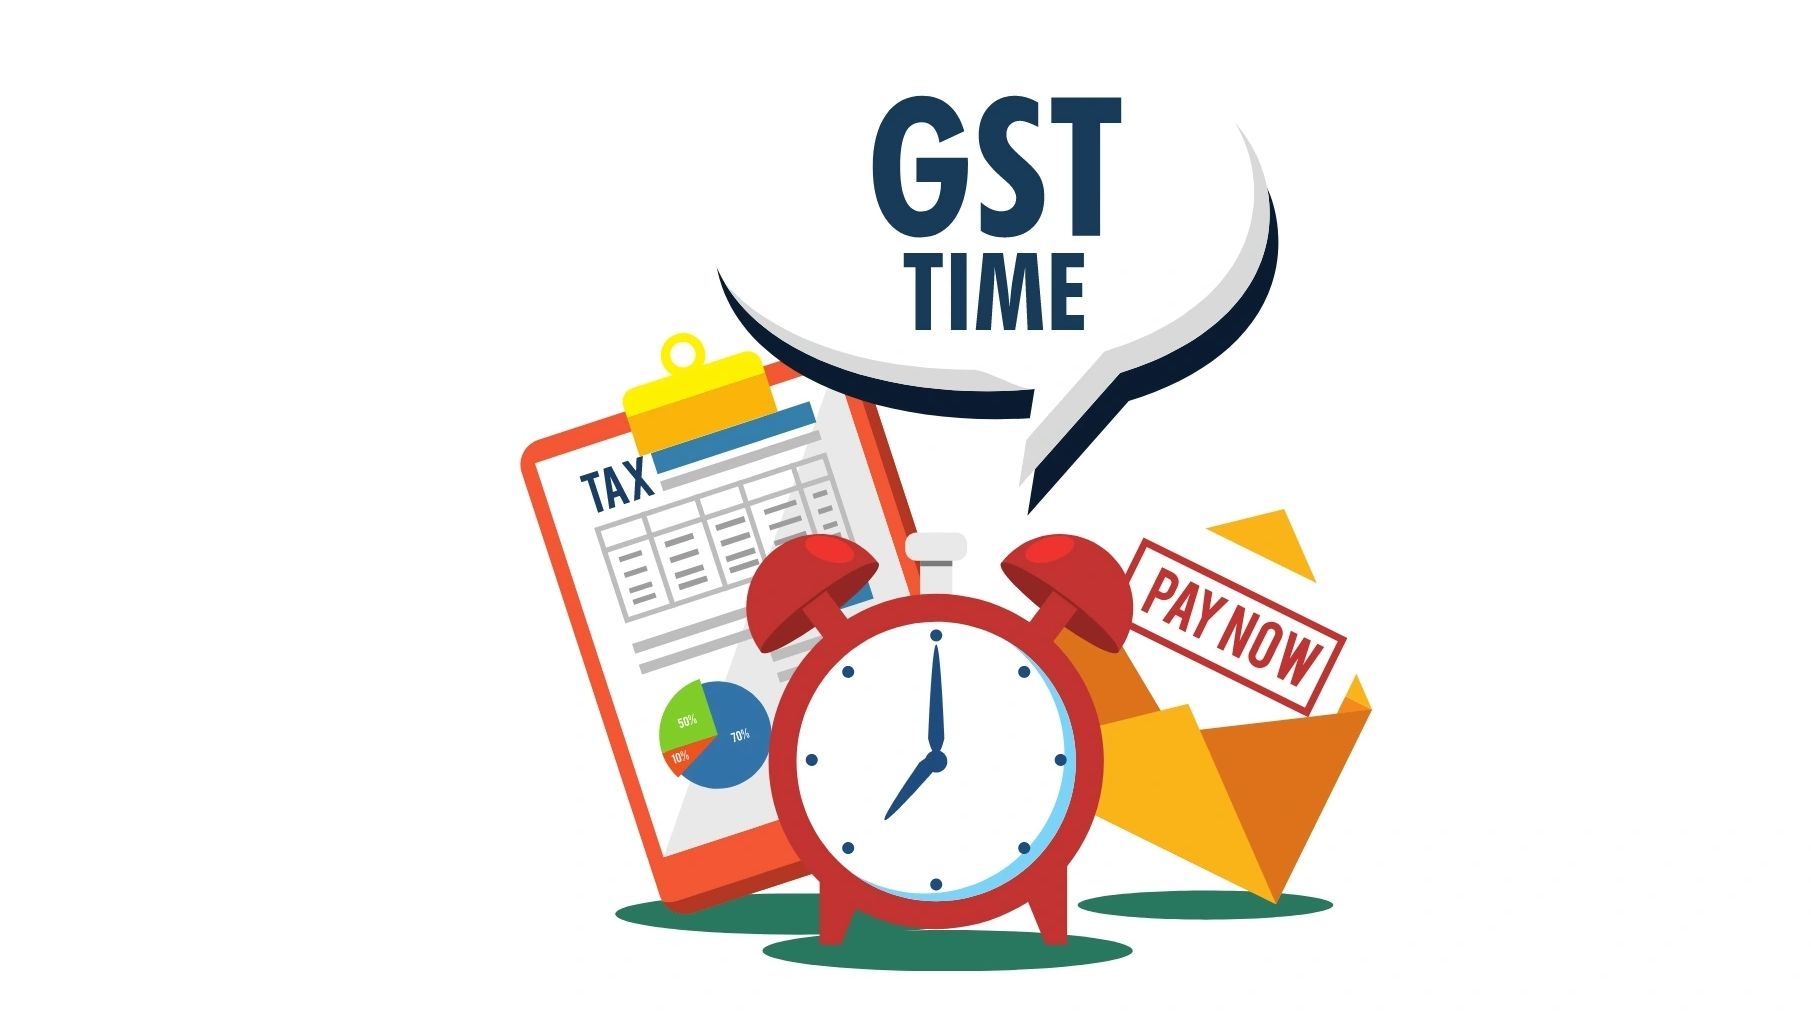 Get your GST returns filed  from MYFINTAX-Online Legal, Tax and Financial Service provider in India 